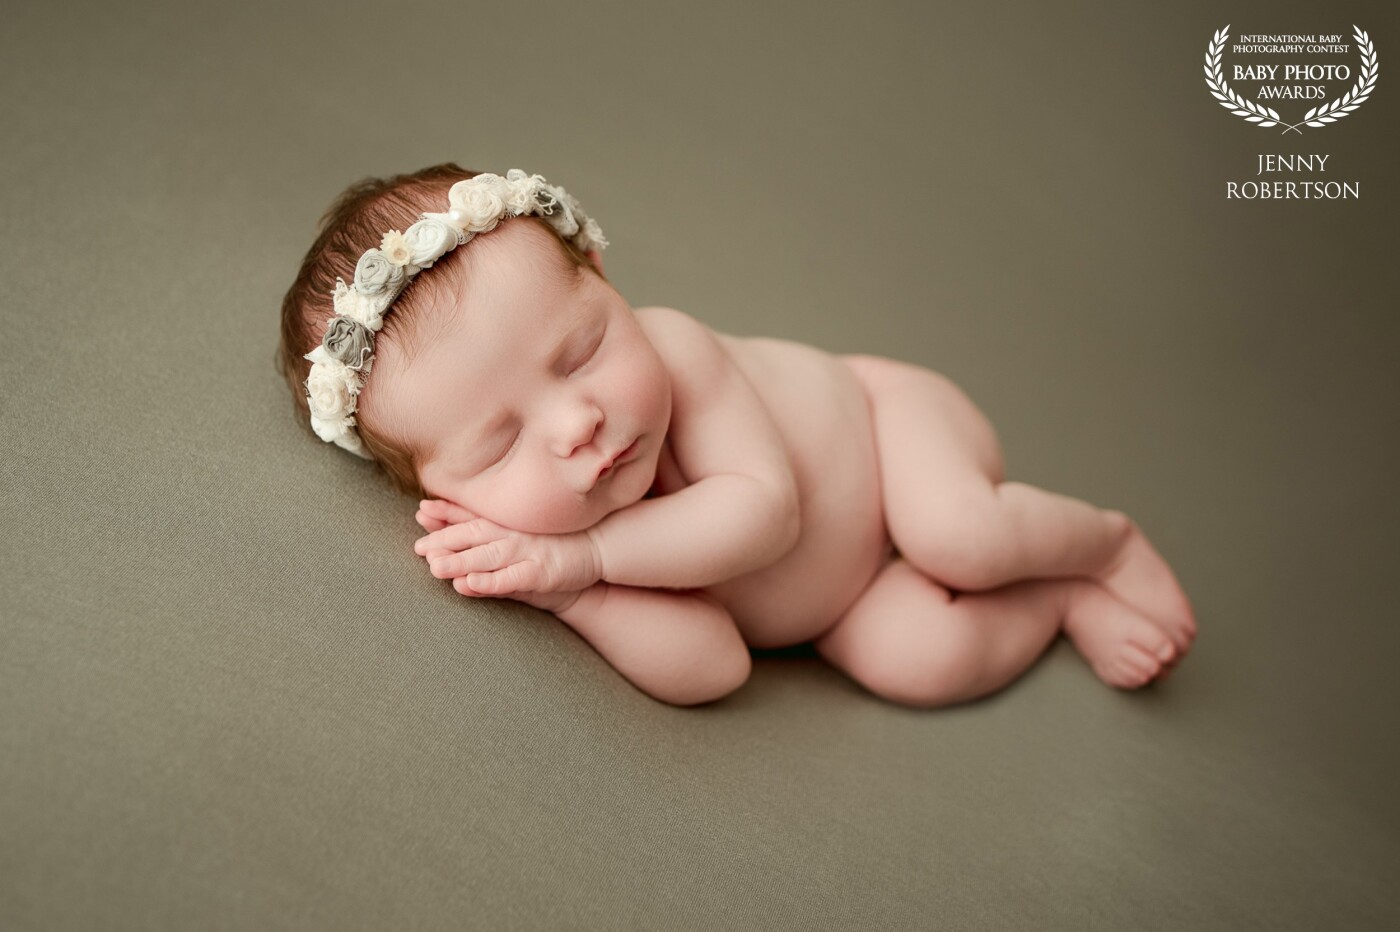 Simple is so beautiful. Side lying is one of my favorite poses because it shows all the baby details. It’s sometimes difficult to get the hands perfectly placed and that’s what I love about this particular image, her hands to cheek are so sweet.